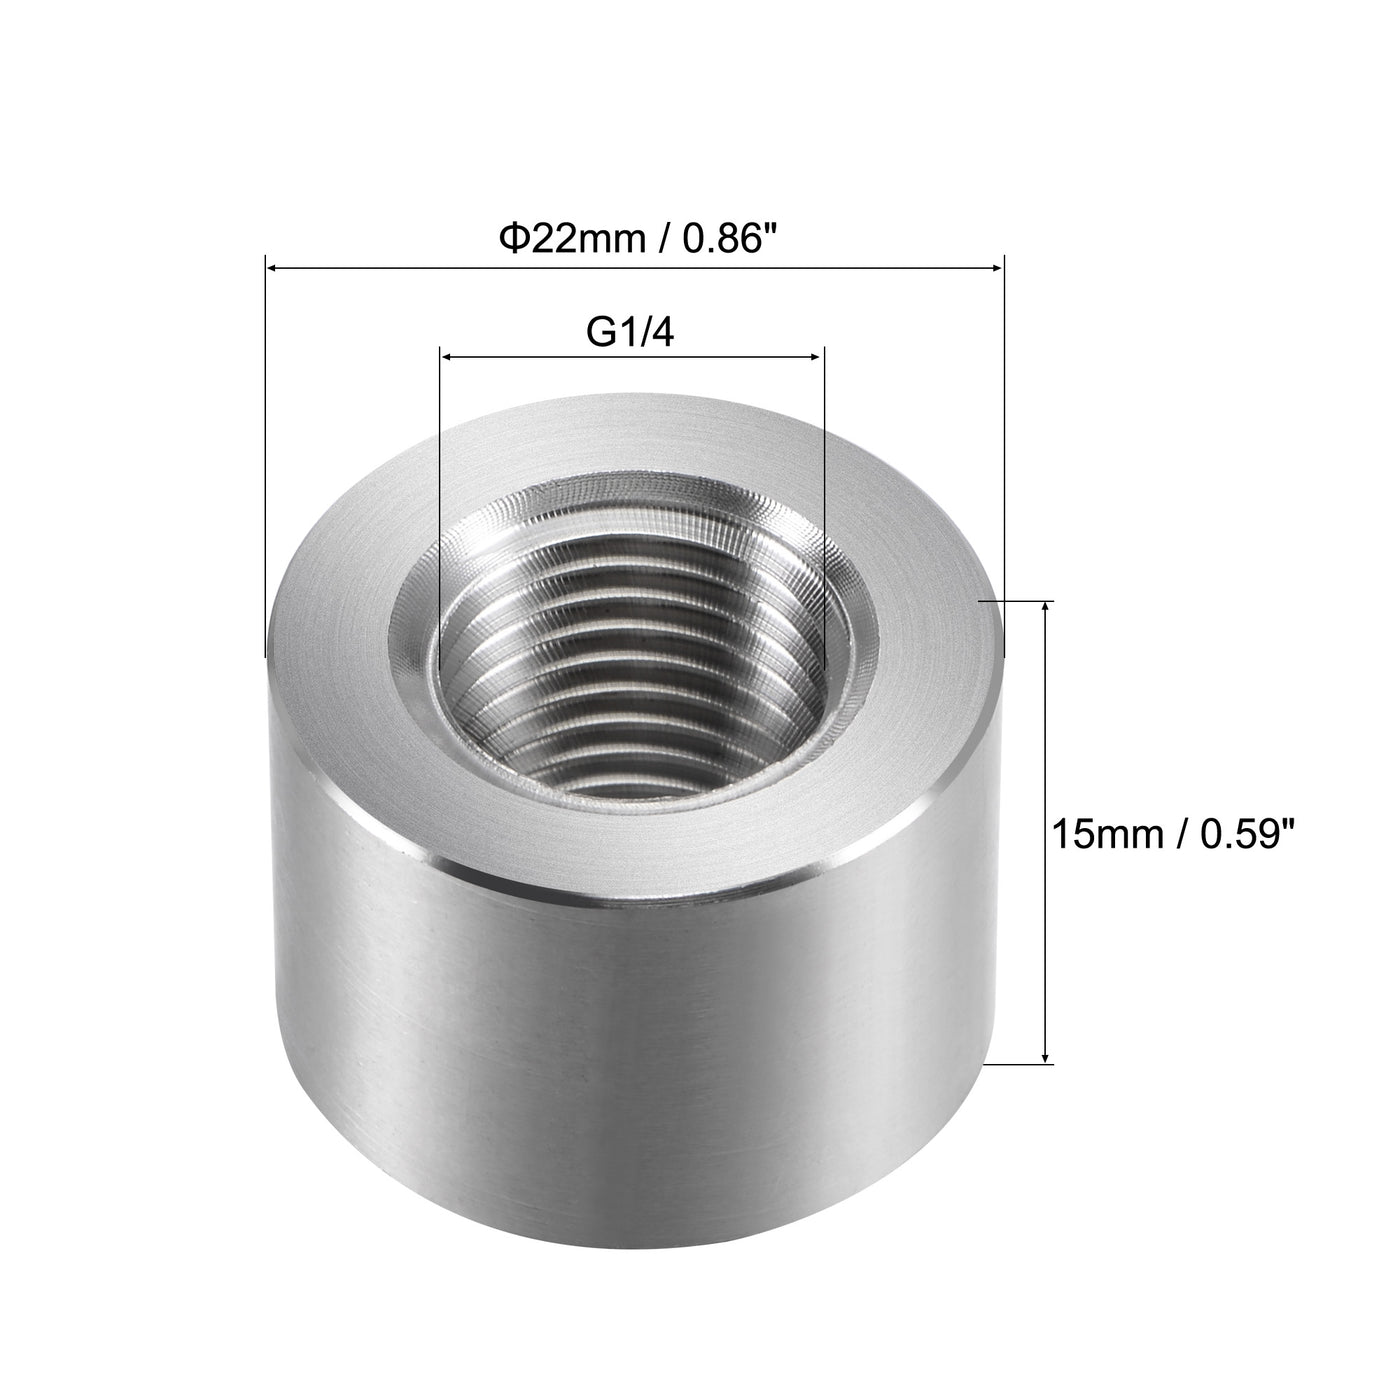 Uxcell Uxcell G3/4 Weld On Bung Female Nut Threaded - Stainless Steel  Insert Weldable 2pcs